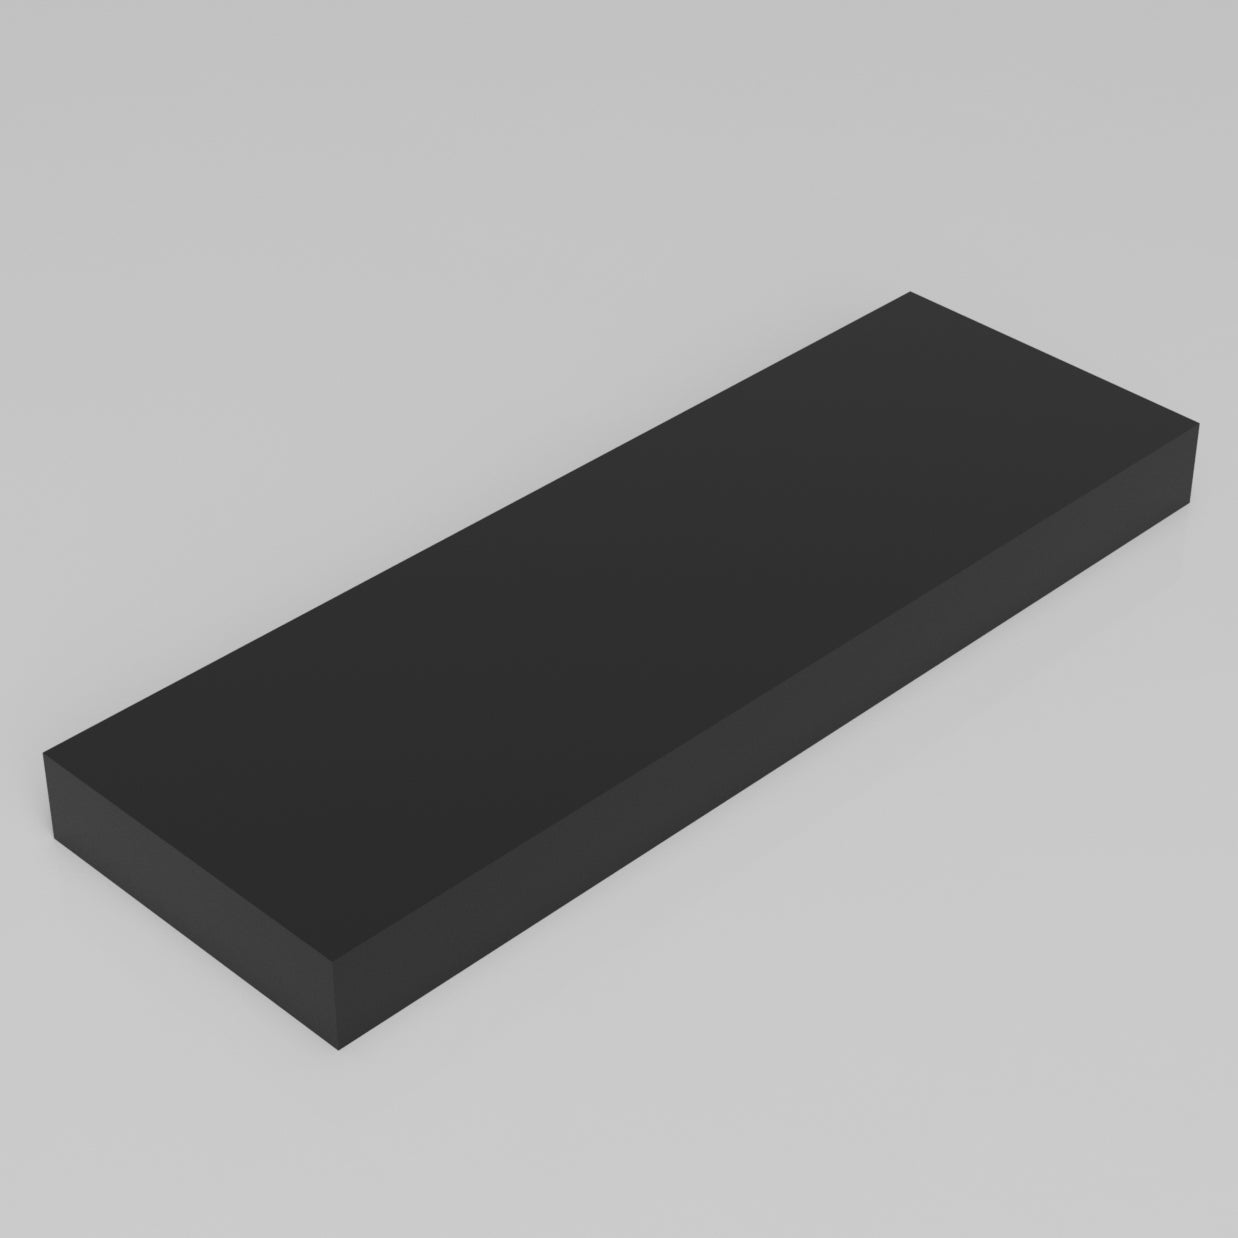 Machinable Wax Rectangular Block Front View 1 Inch by 4 Inch by 12 Inch